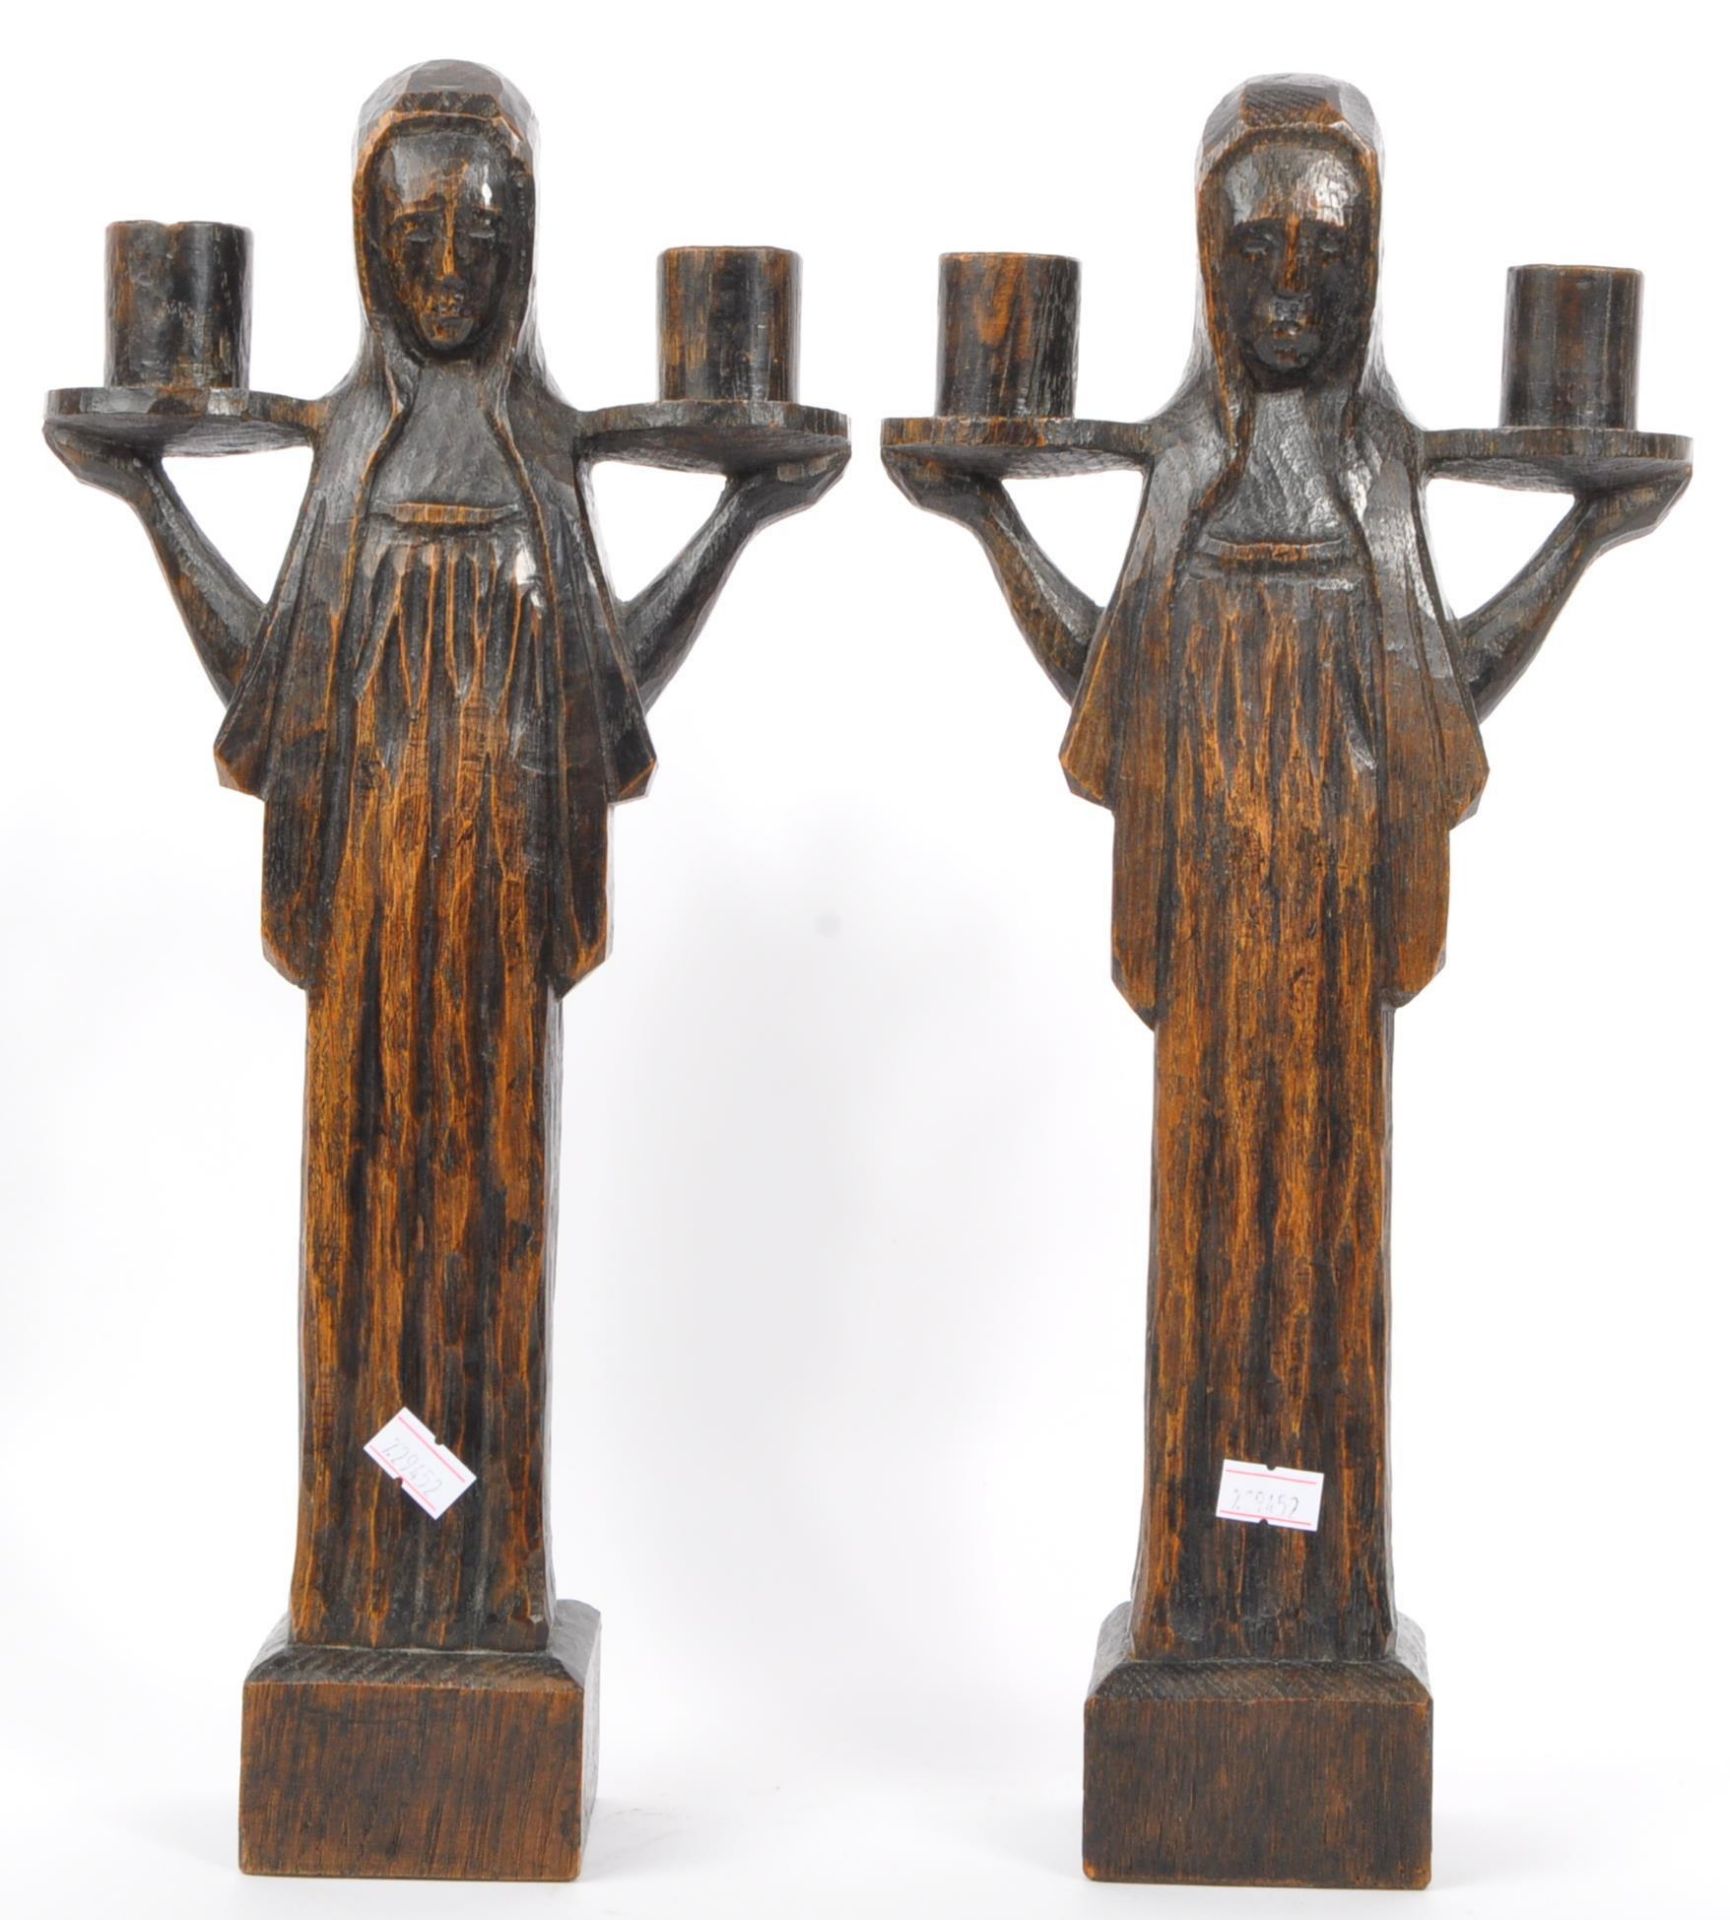 PAIR OF 20TH CENTURY HAND CARVED WOODEN CANDLESTICKS